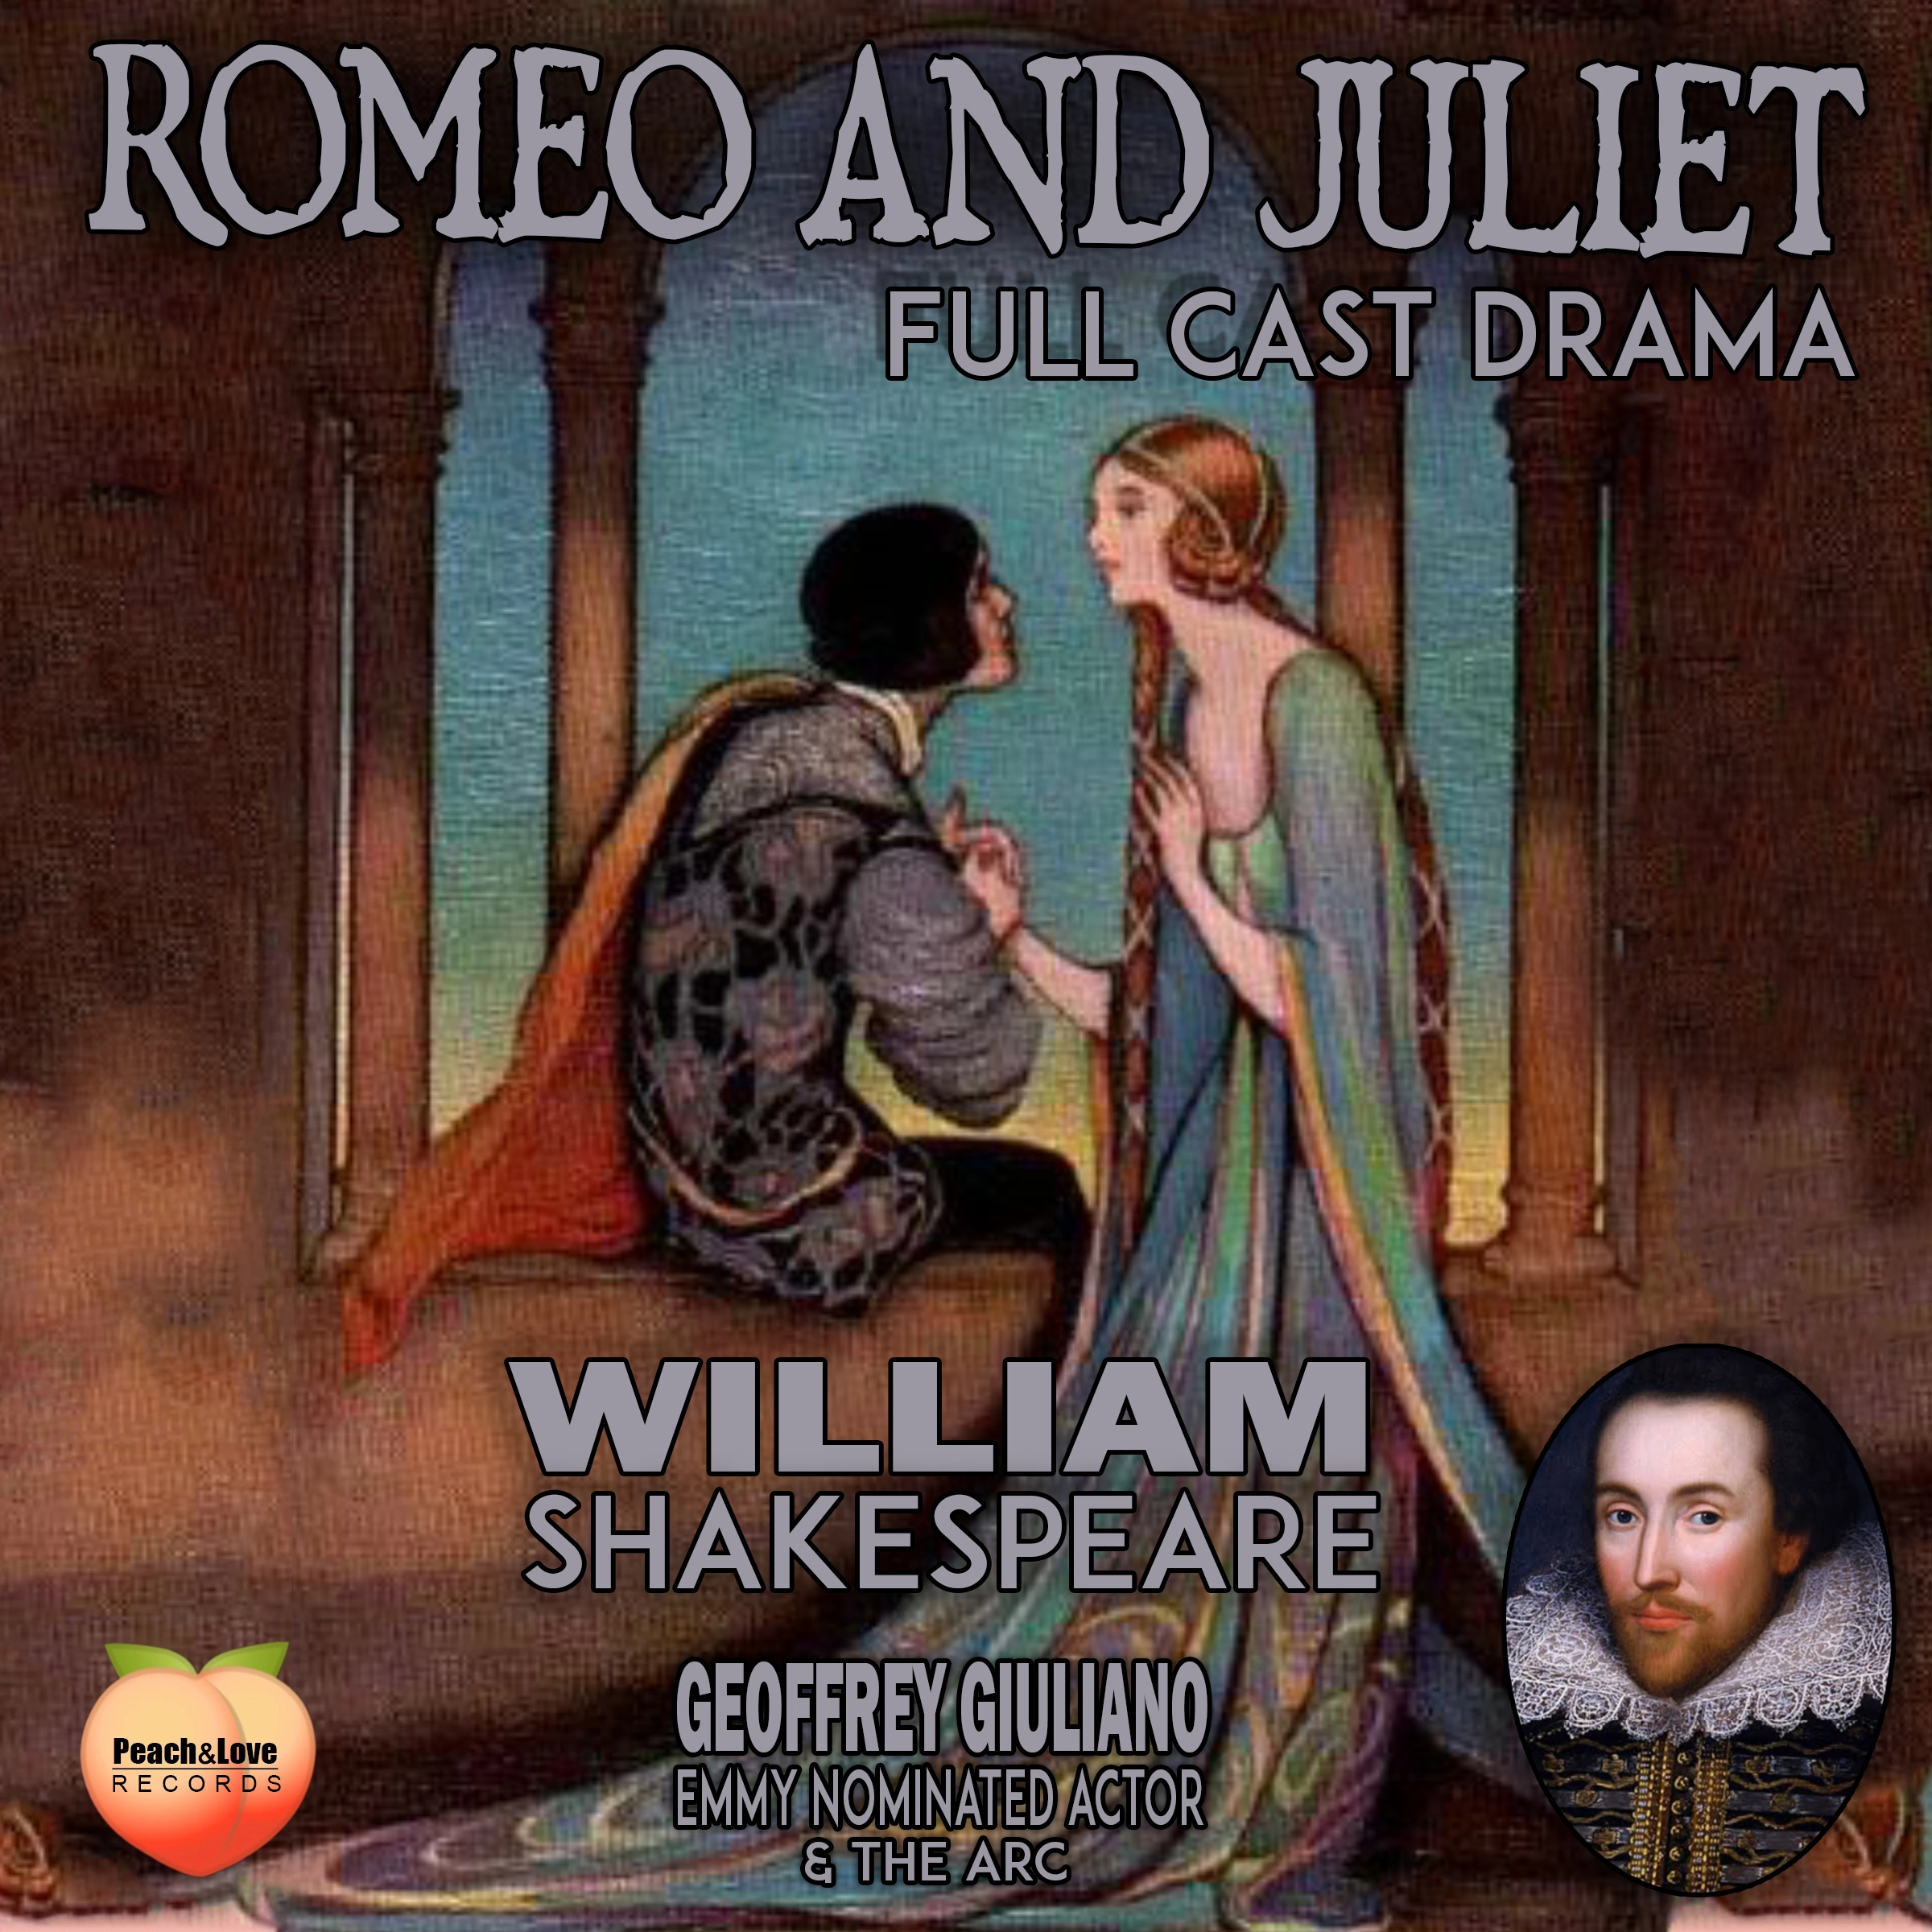 Romeo and Juilet by William Shakespeare